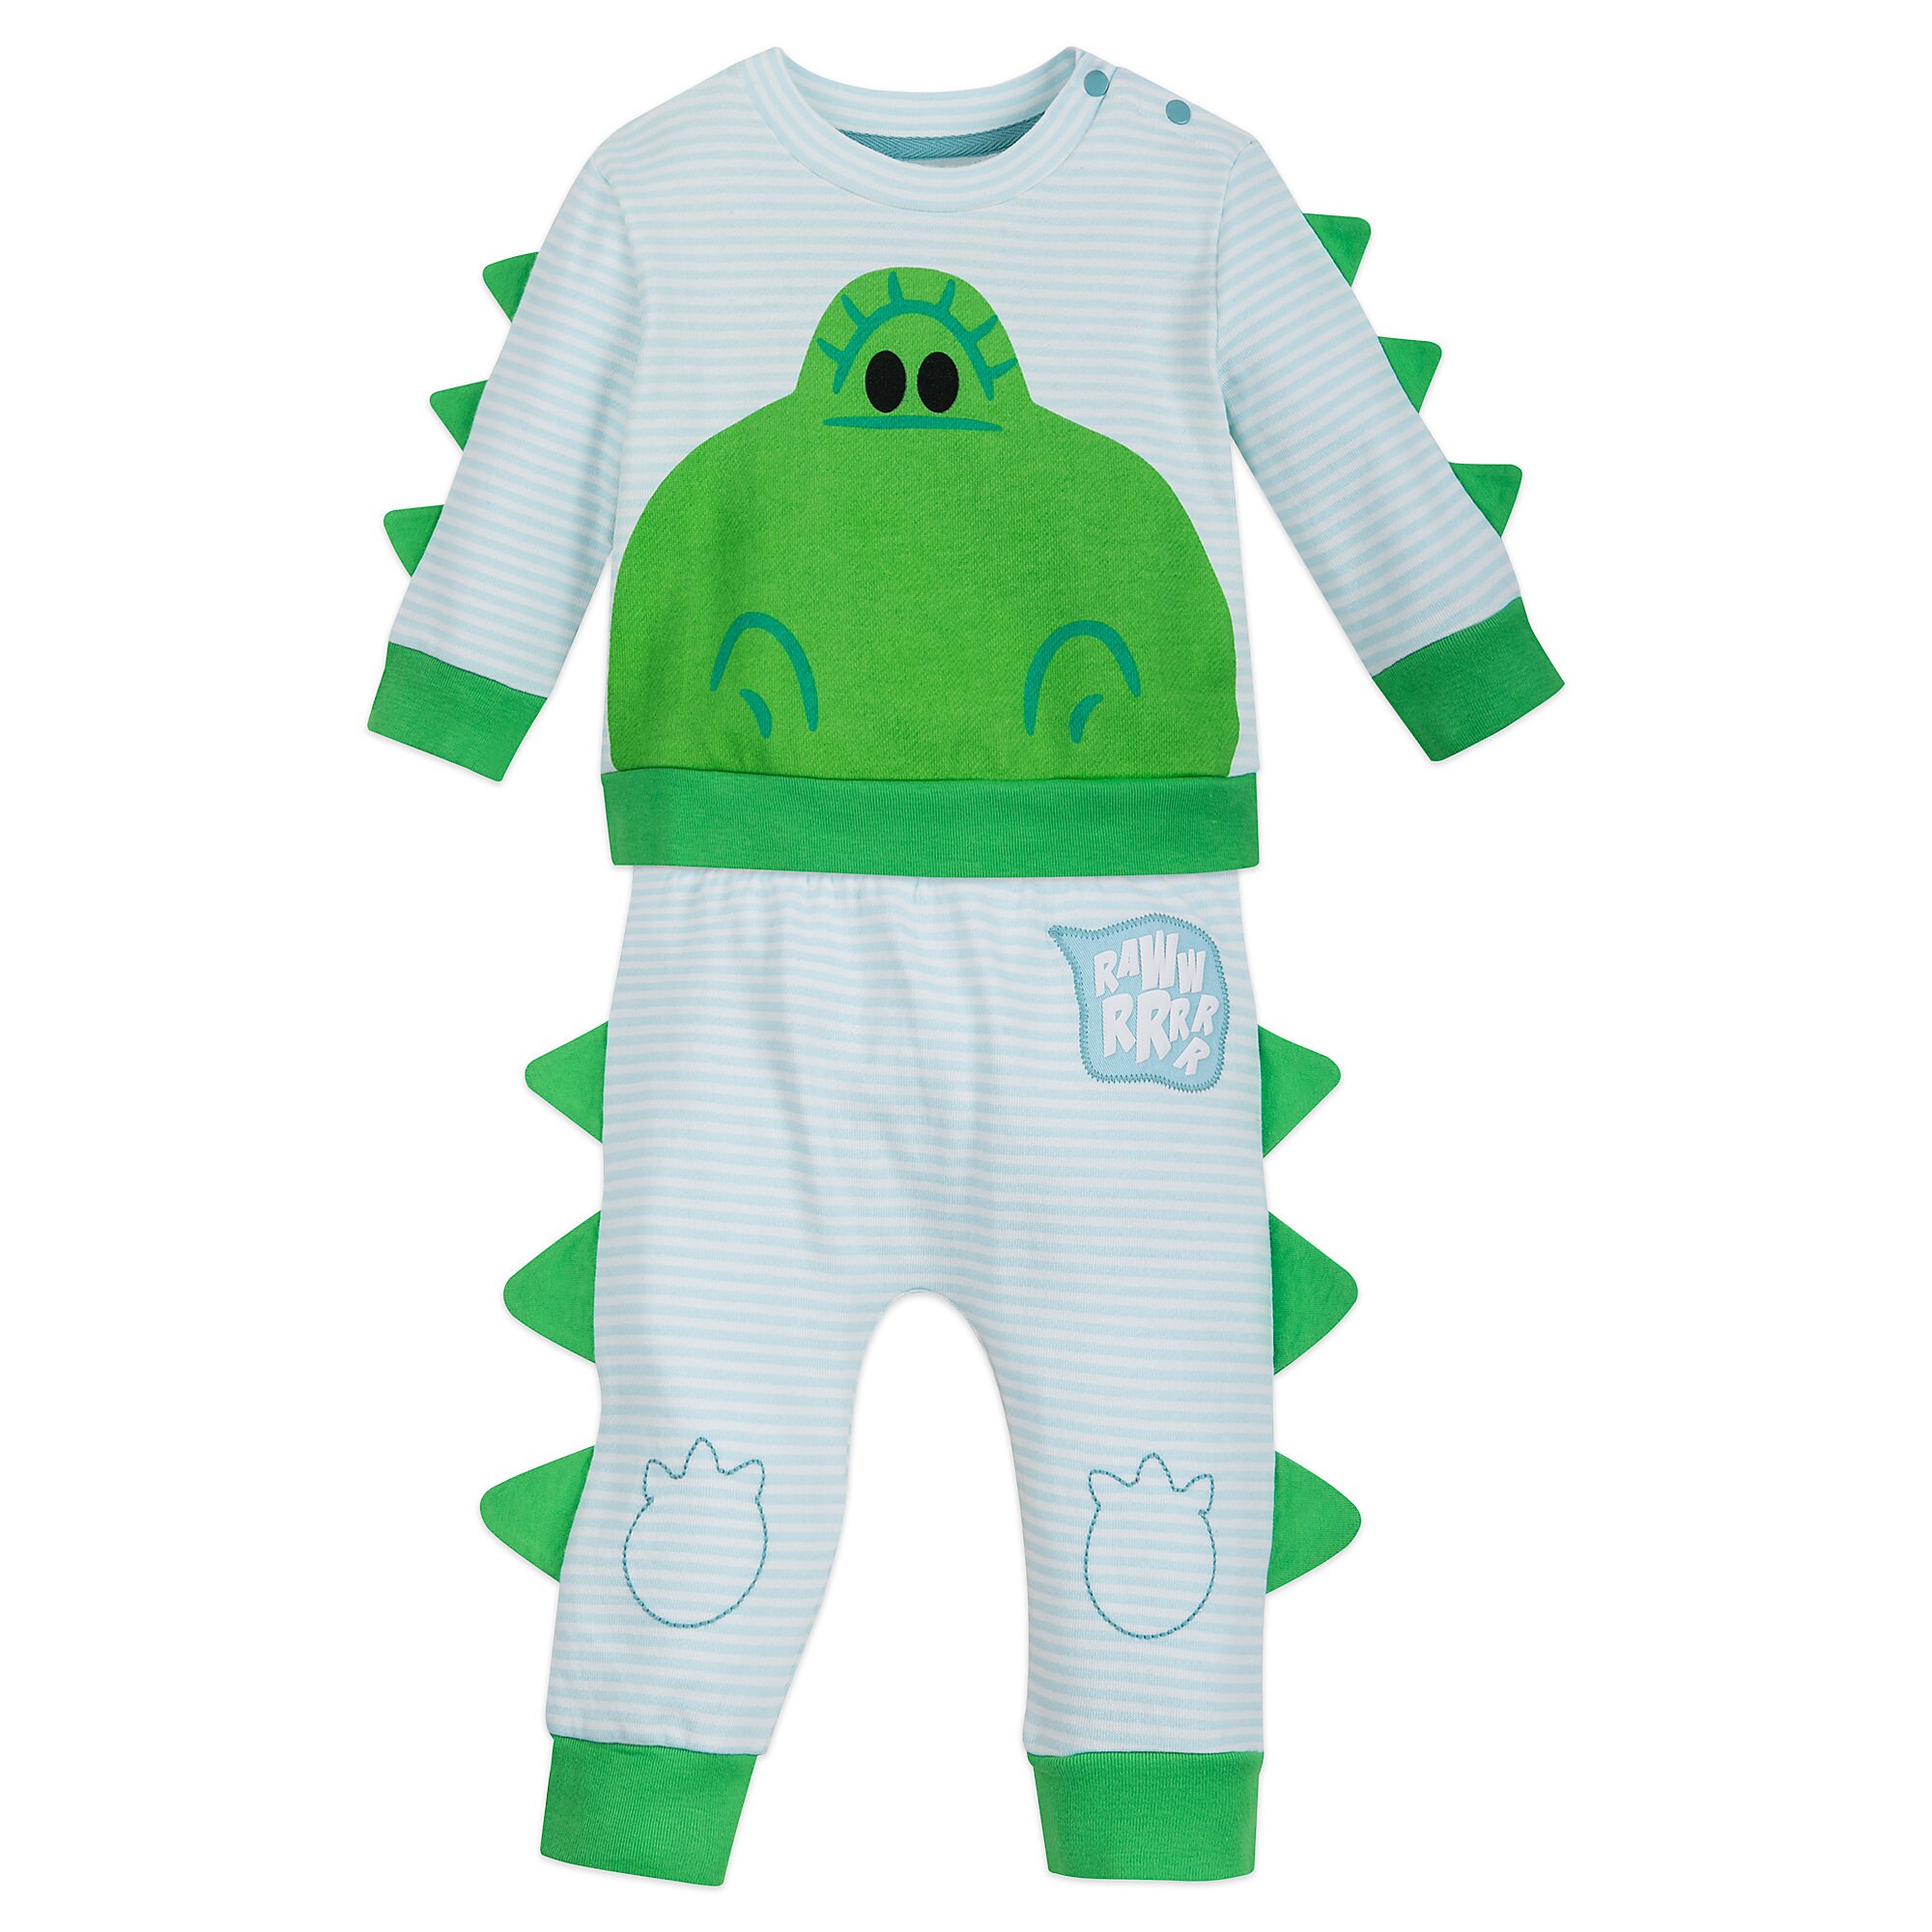 Rex Knit Shirt and Pants Set for Baby - Toy Story